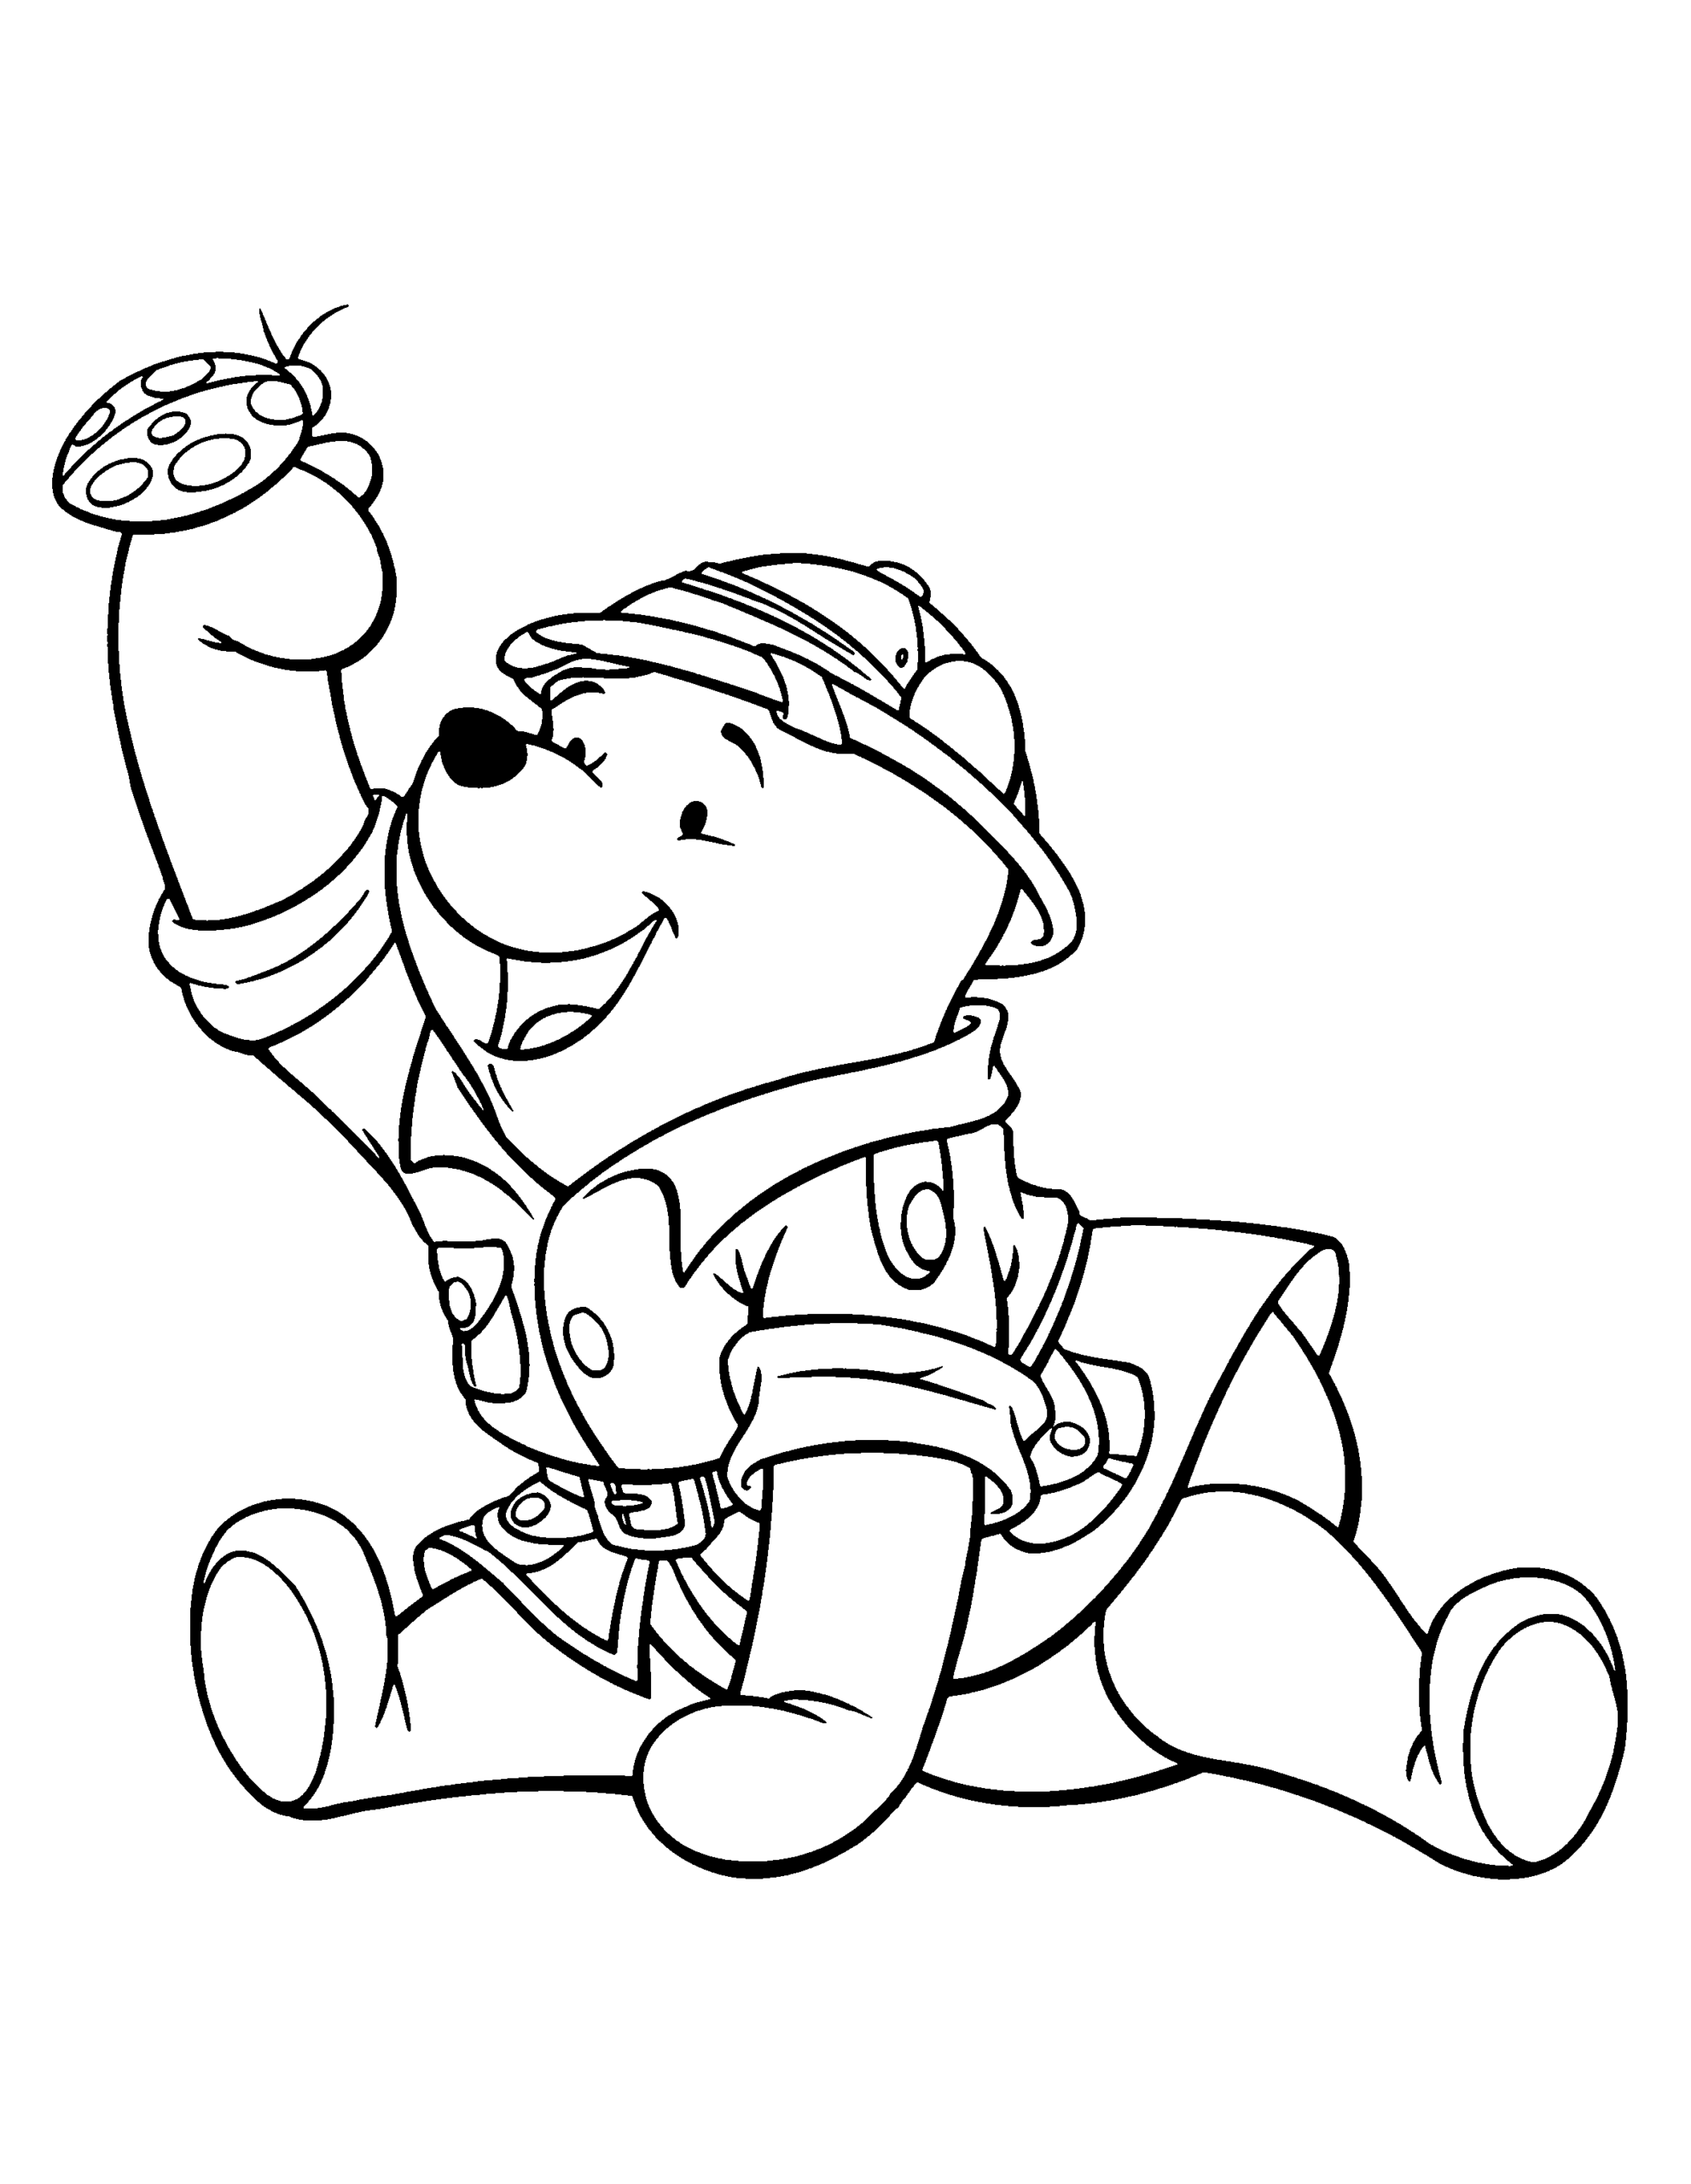 Winnie the Pooh Coloring Pages Cartoons winnie the pooh 84 Printable 2020 7205 Coloring4free